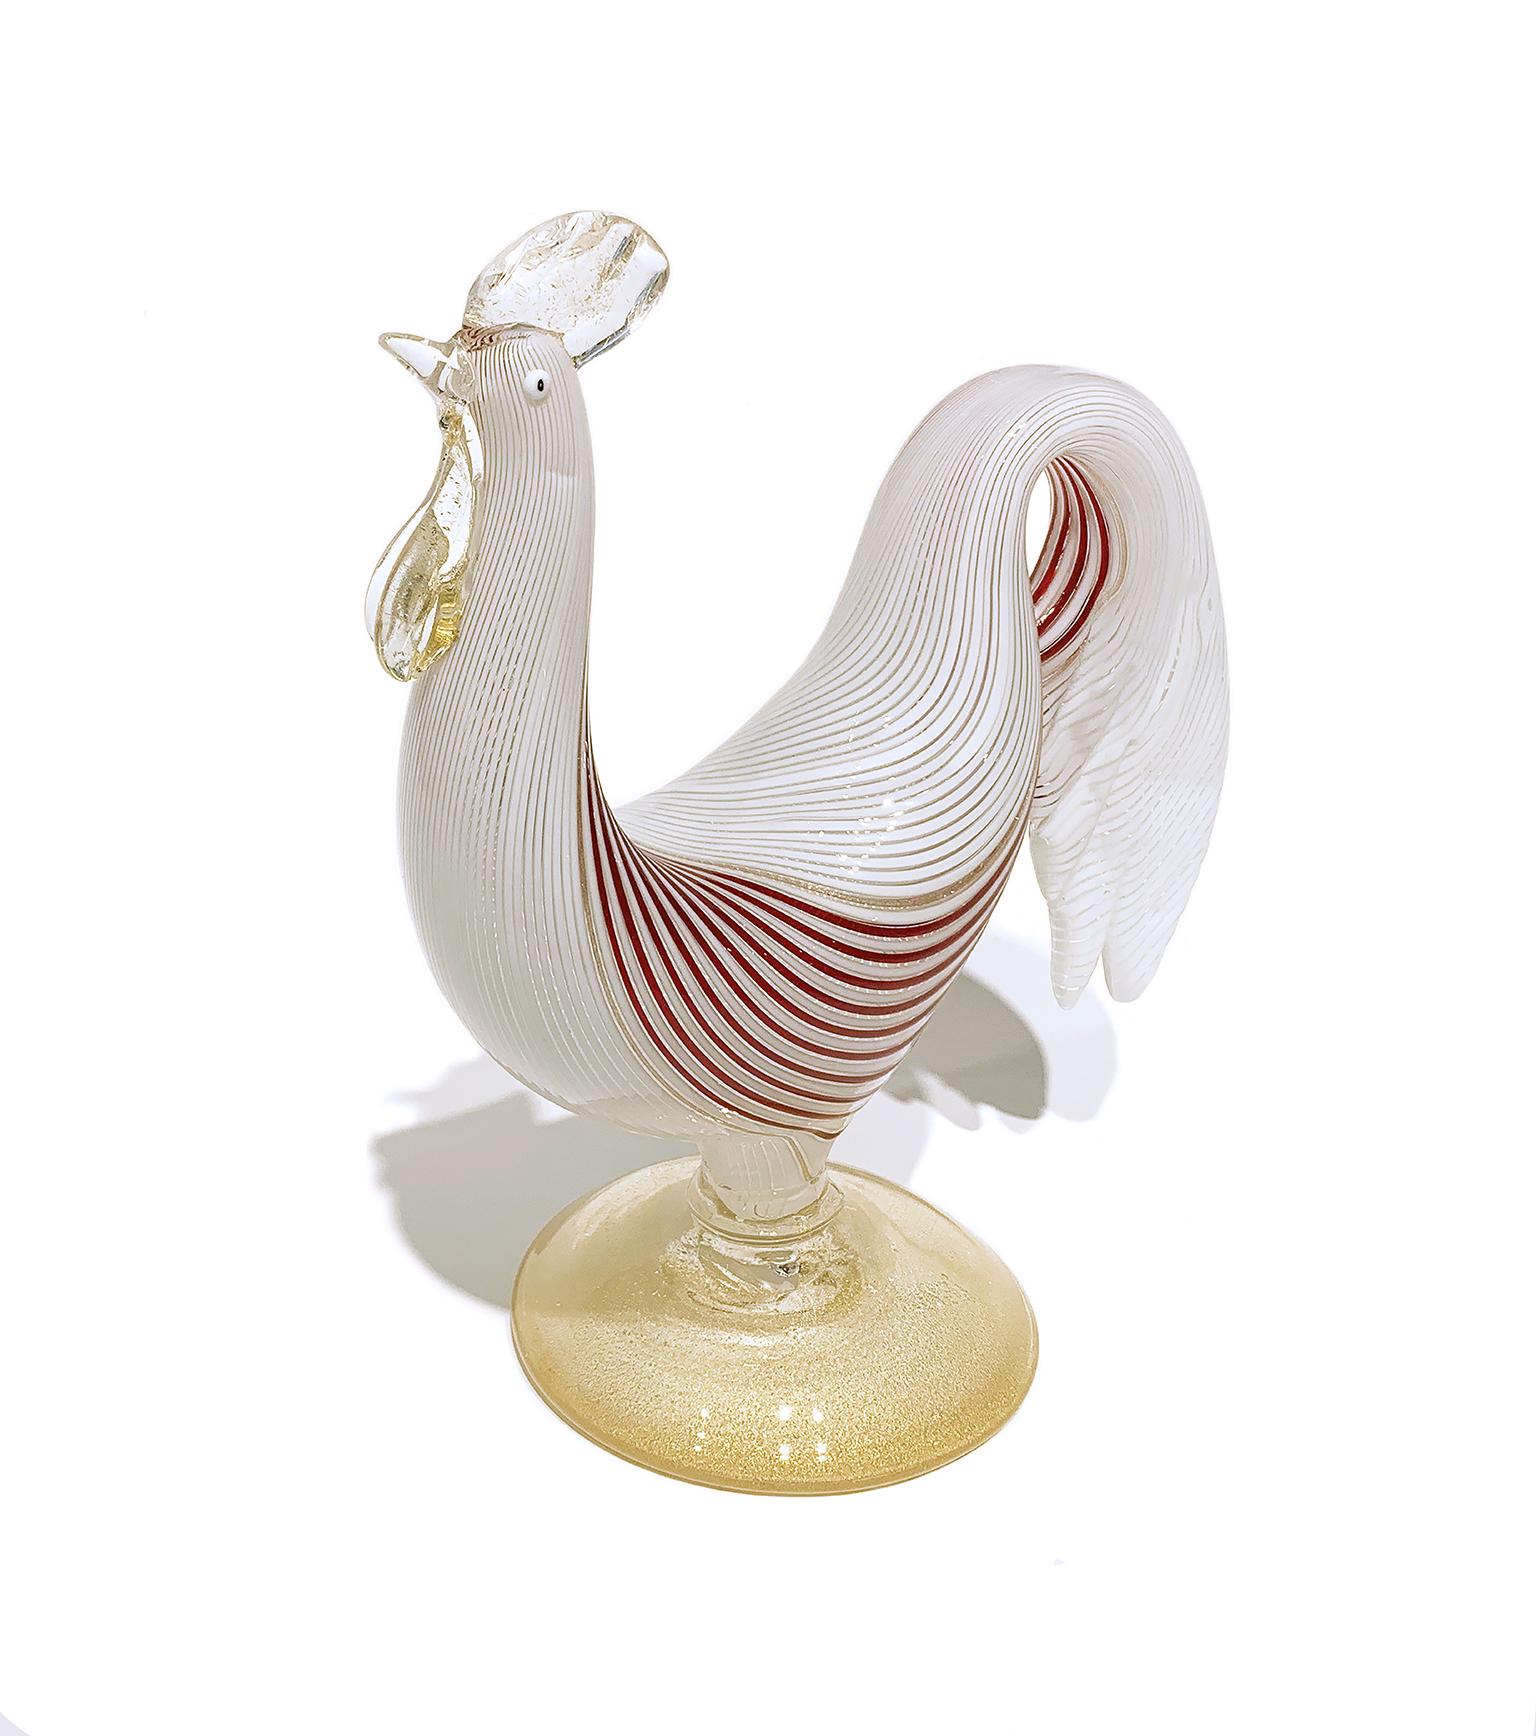 Rooster- shaped sculpture Galletto 
Dino Martens (1894 - 1970)
Vetreria Artistica Rag. Aureliano Toso, 1954 
It measures 9.25 inches in height x 8.18 in x 4.4 in (23.5 cm x 20.8 cm x 11.4 cm)
It weighs 2.57 lb (1.169 g)
State of conservation: